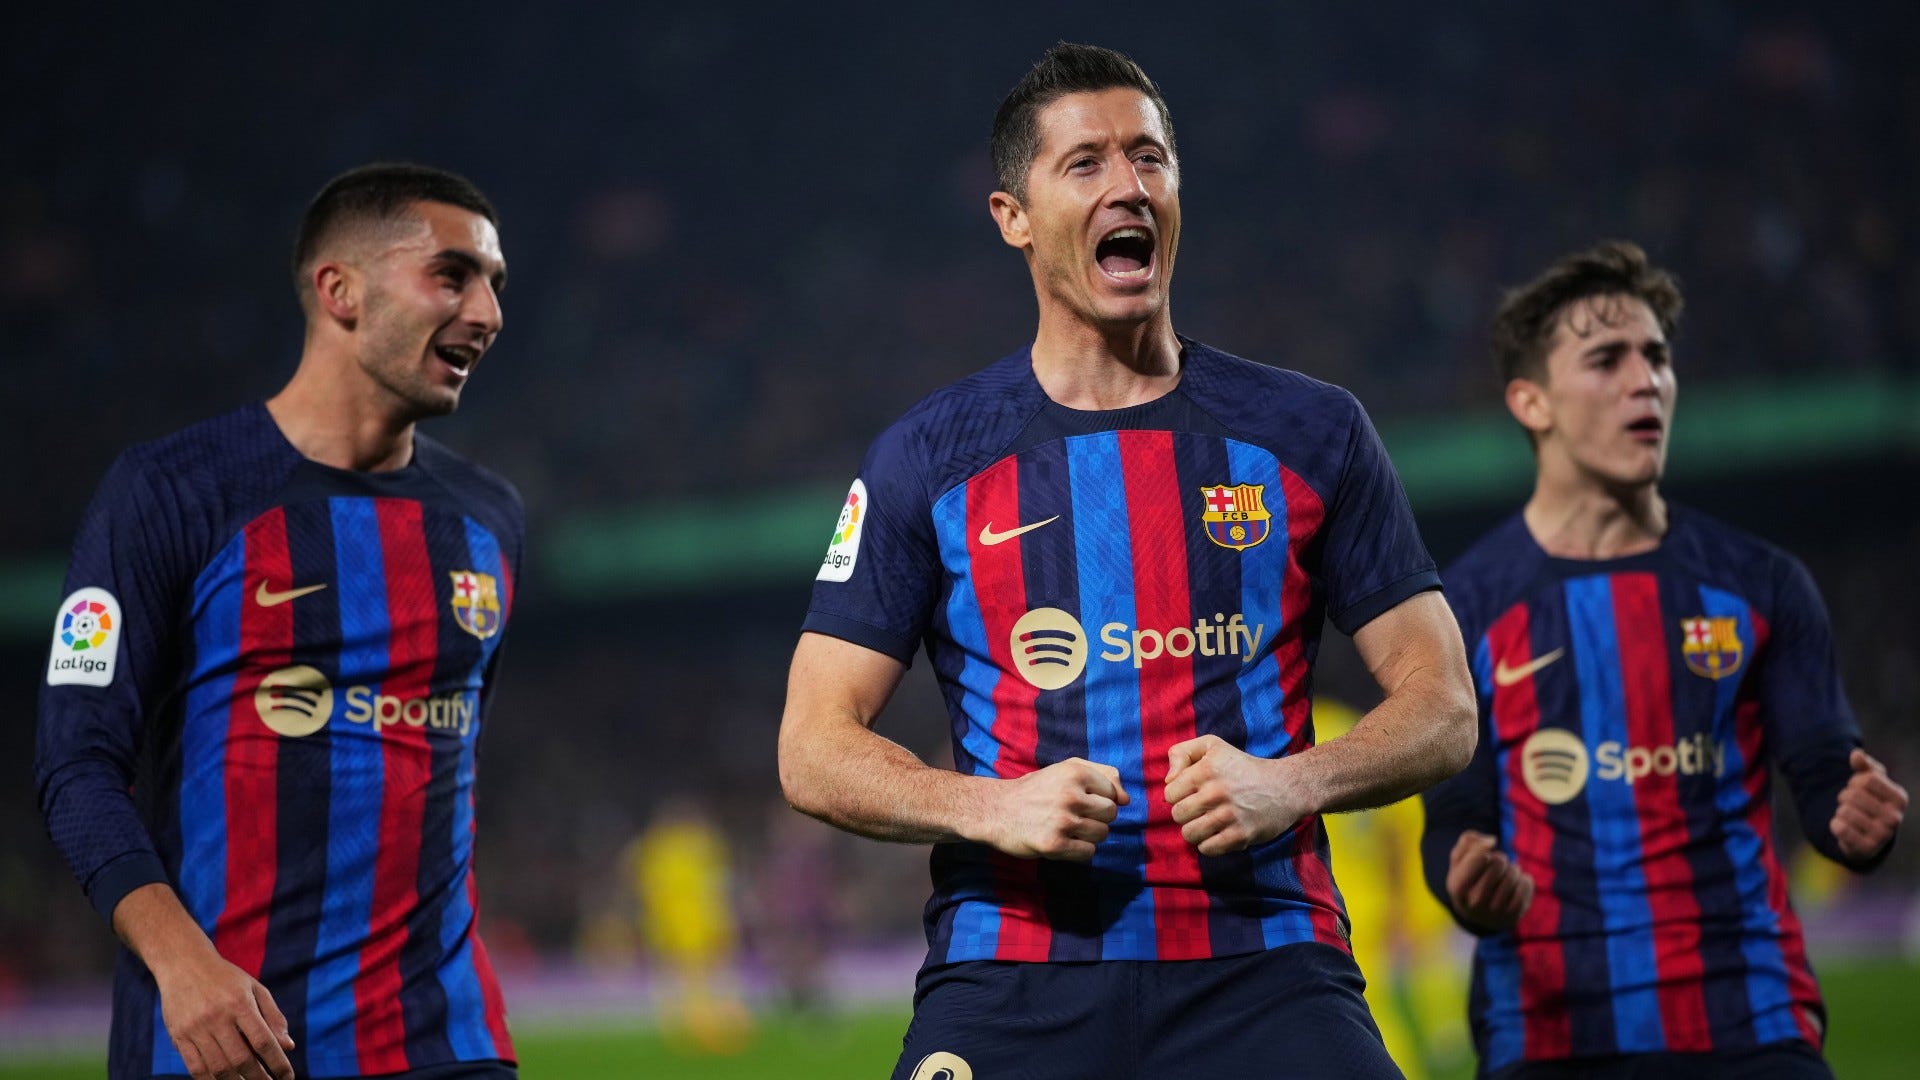 Barcelona vs Girona Where to watch the match online, live stream, TV channels and kick-off time Goal US